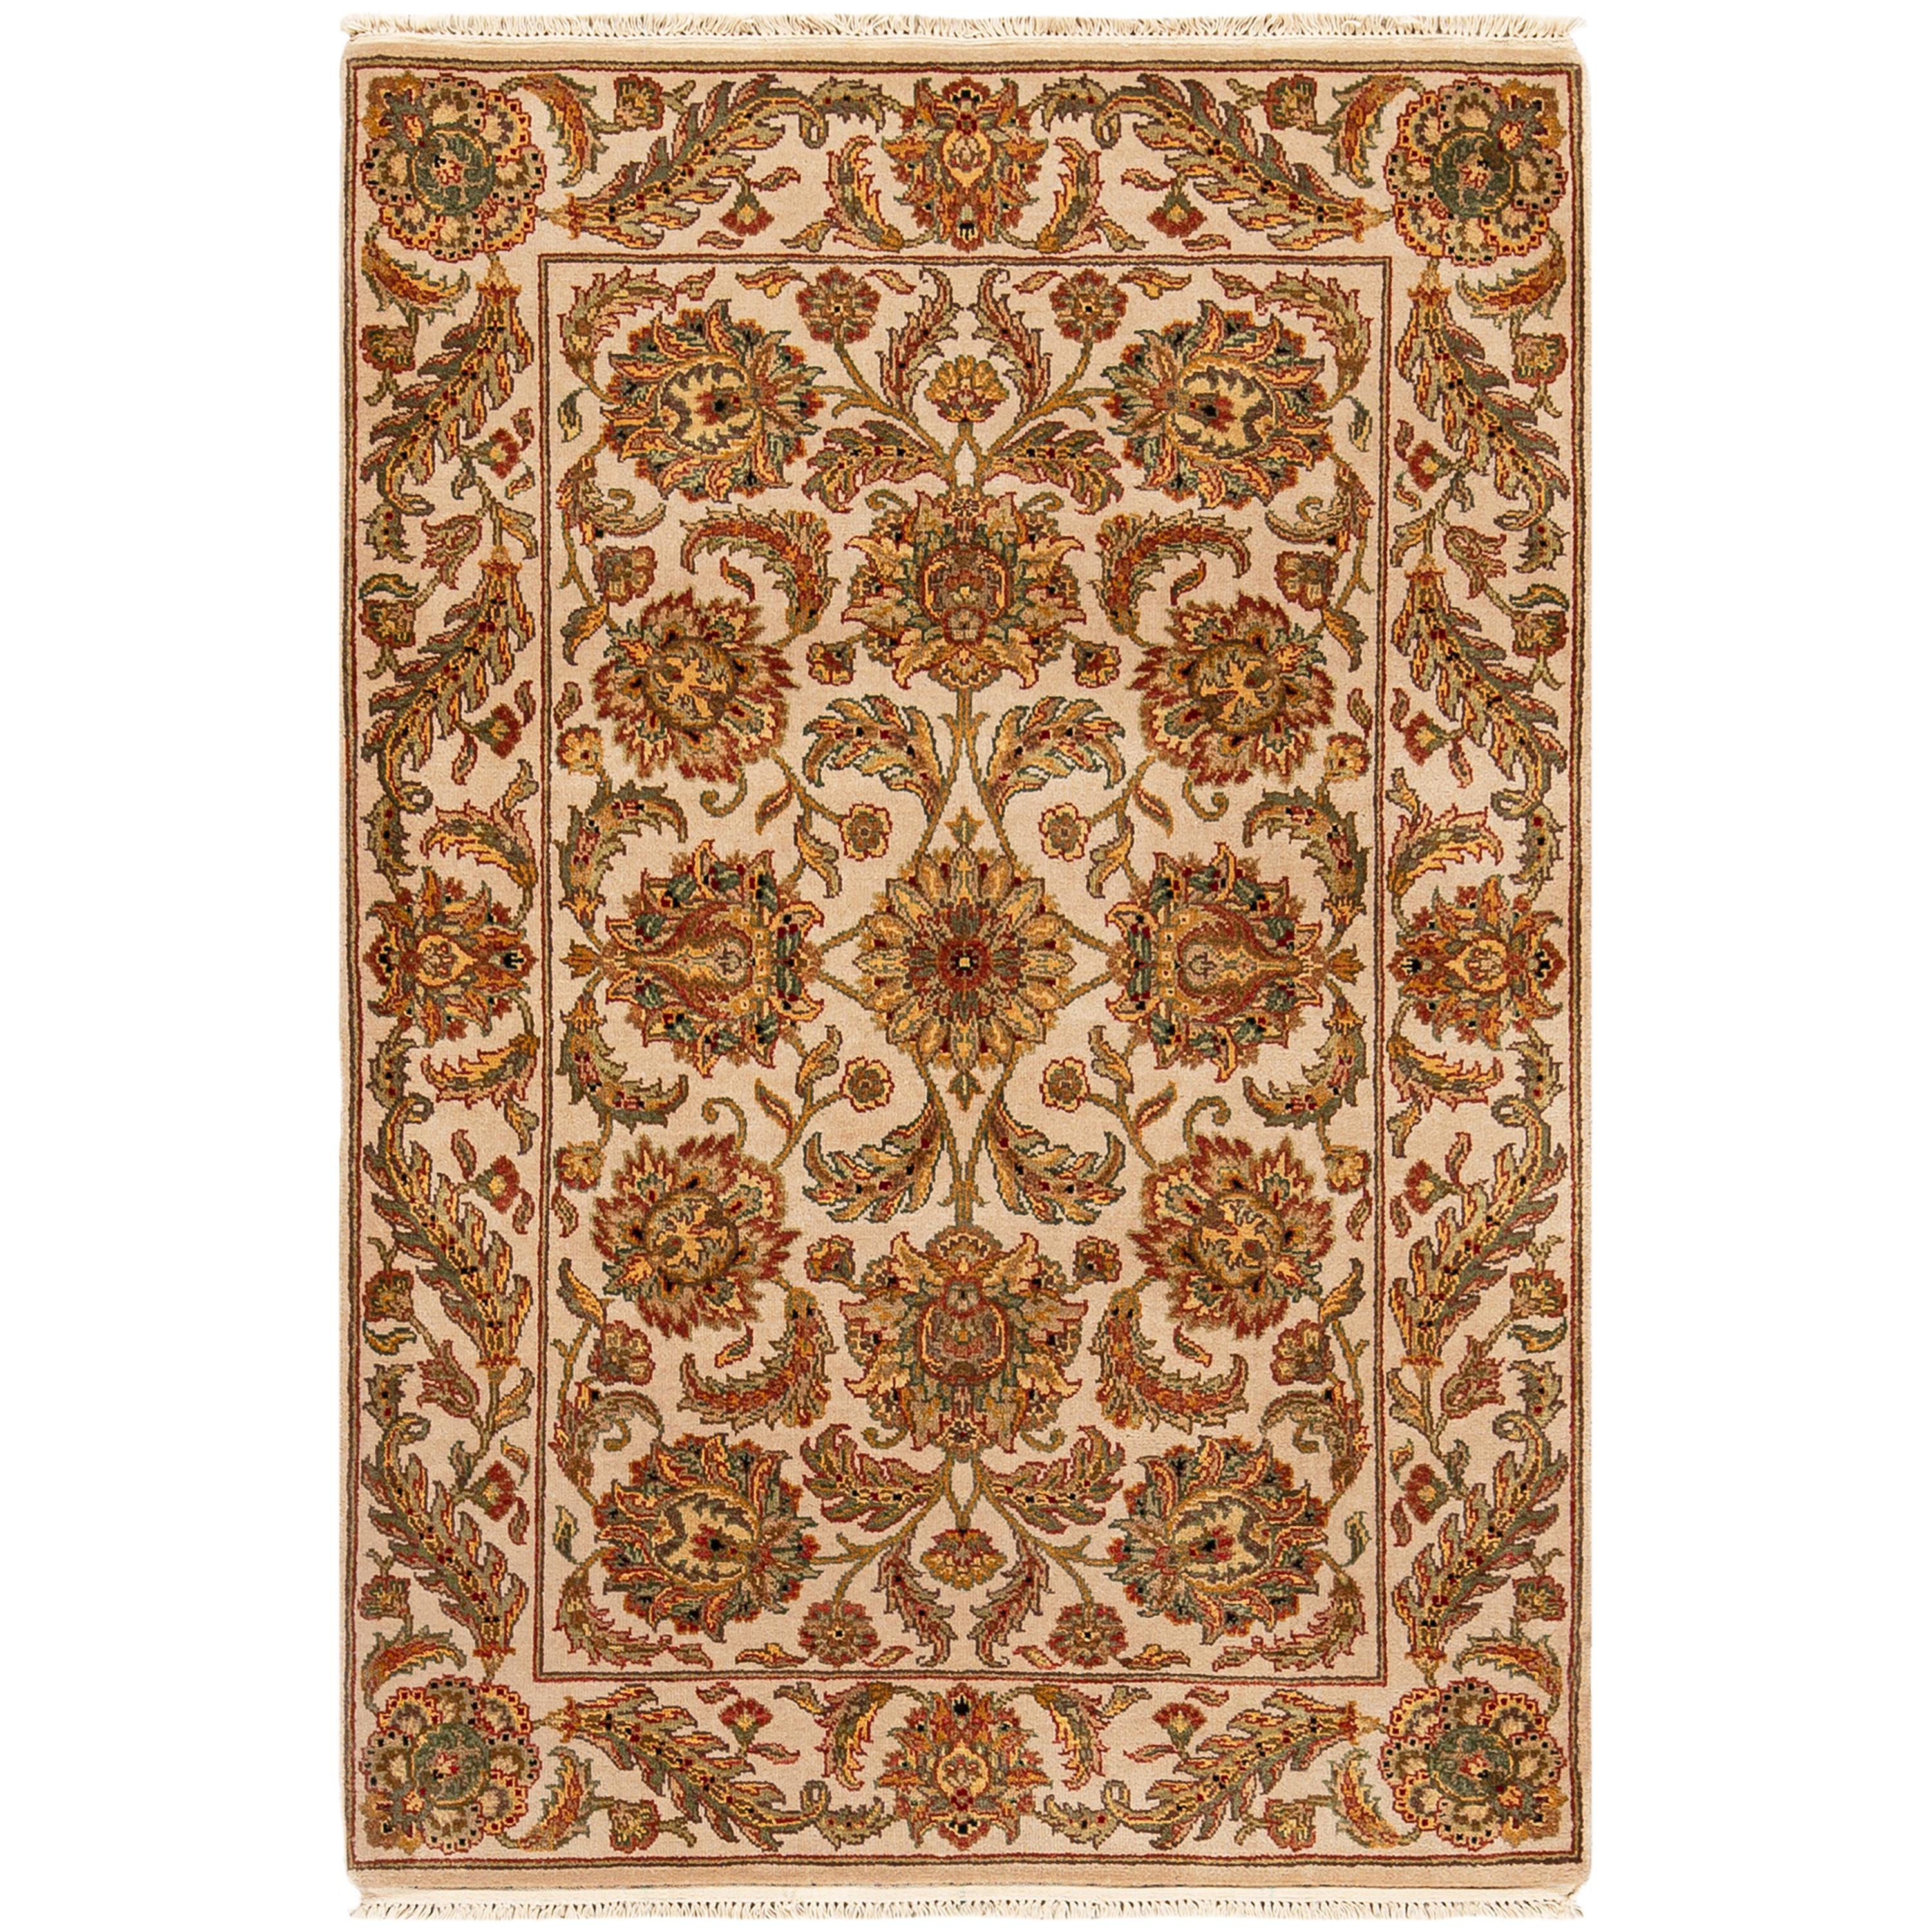 Traditional Handwoven Wool Area Rug, Wilshire Rugs Collection